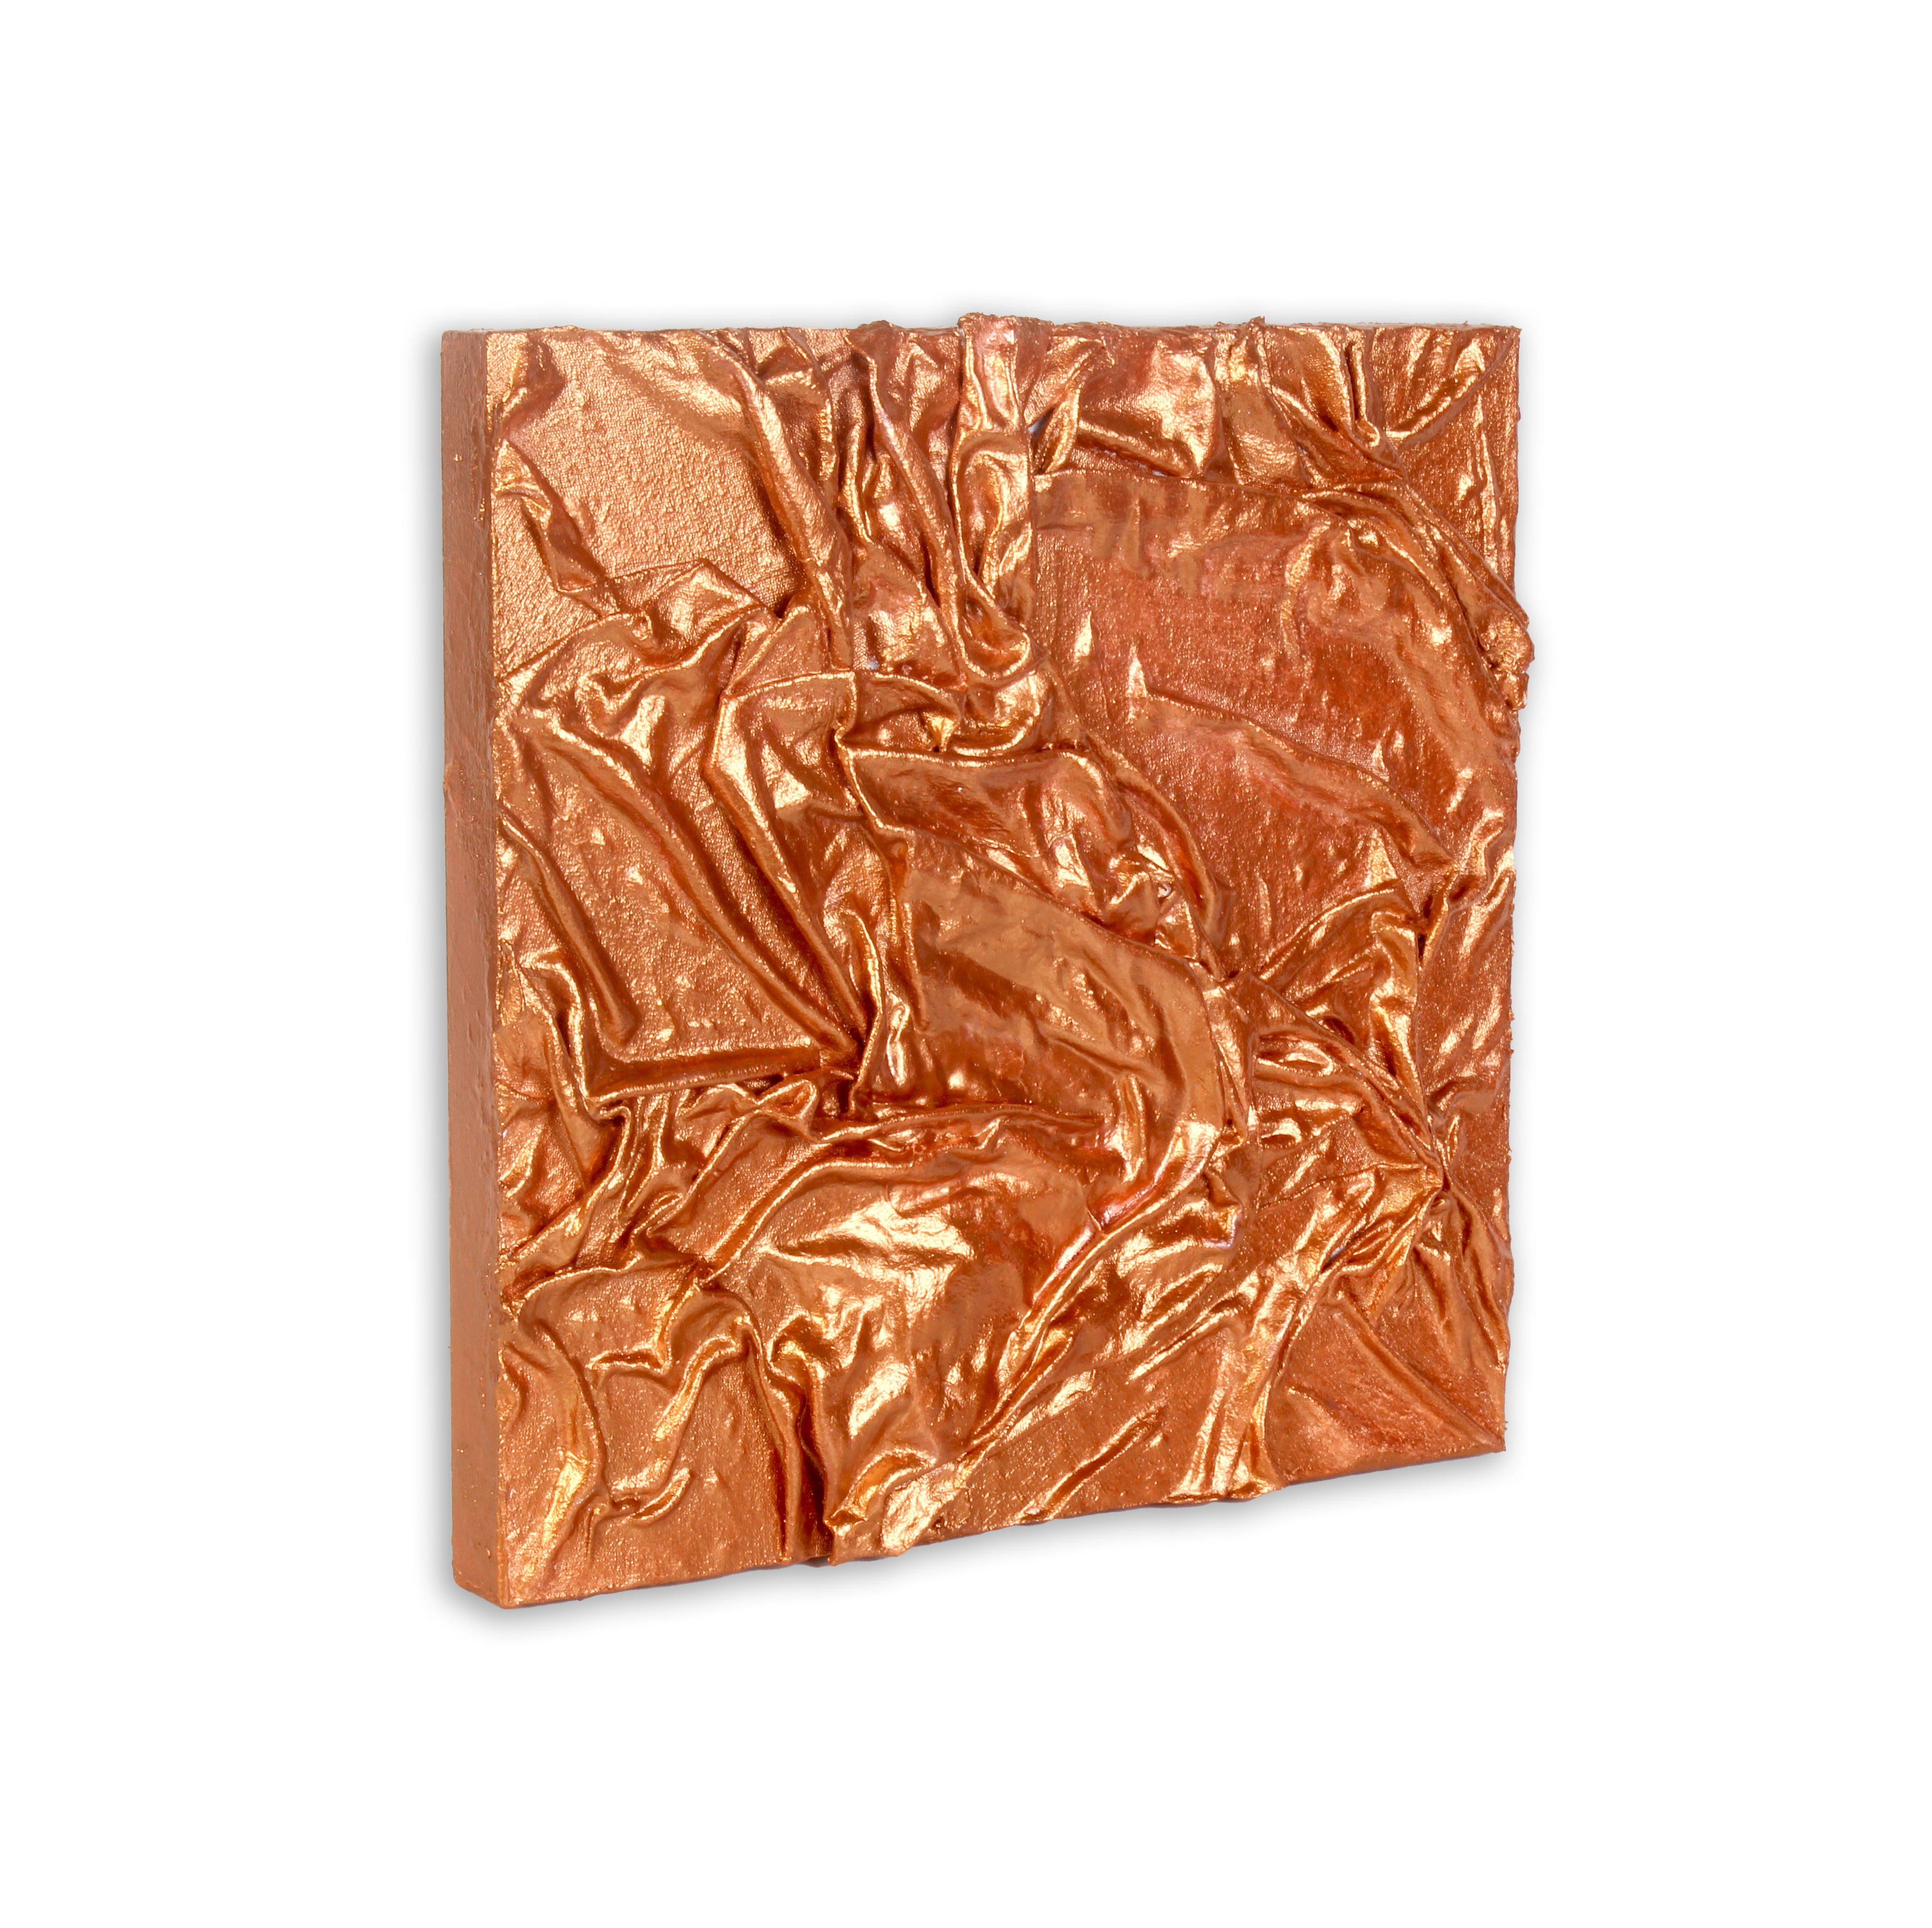 Wall Decor Faux Leather Art Copper Sheen Approx H12 X L12 X D0.78inch 1pc